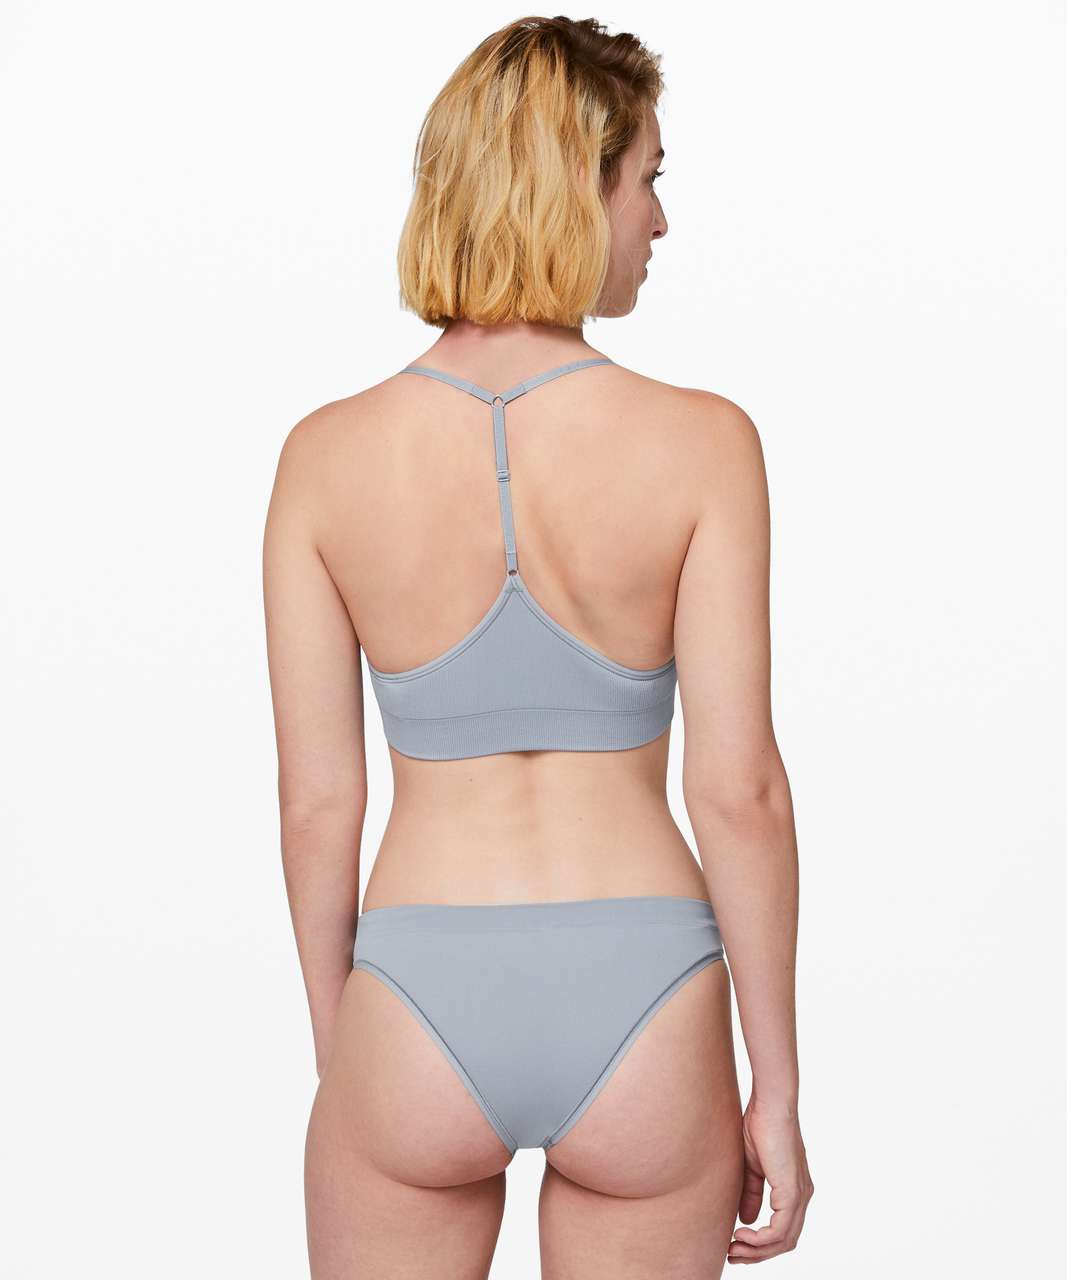 Lululemon Truly Tranquil Bralette - Chambray